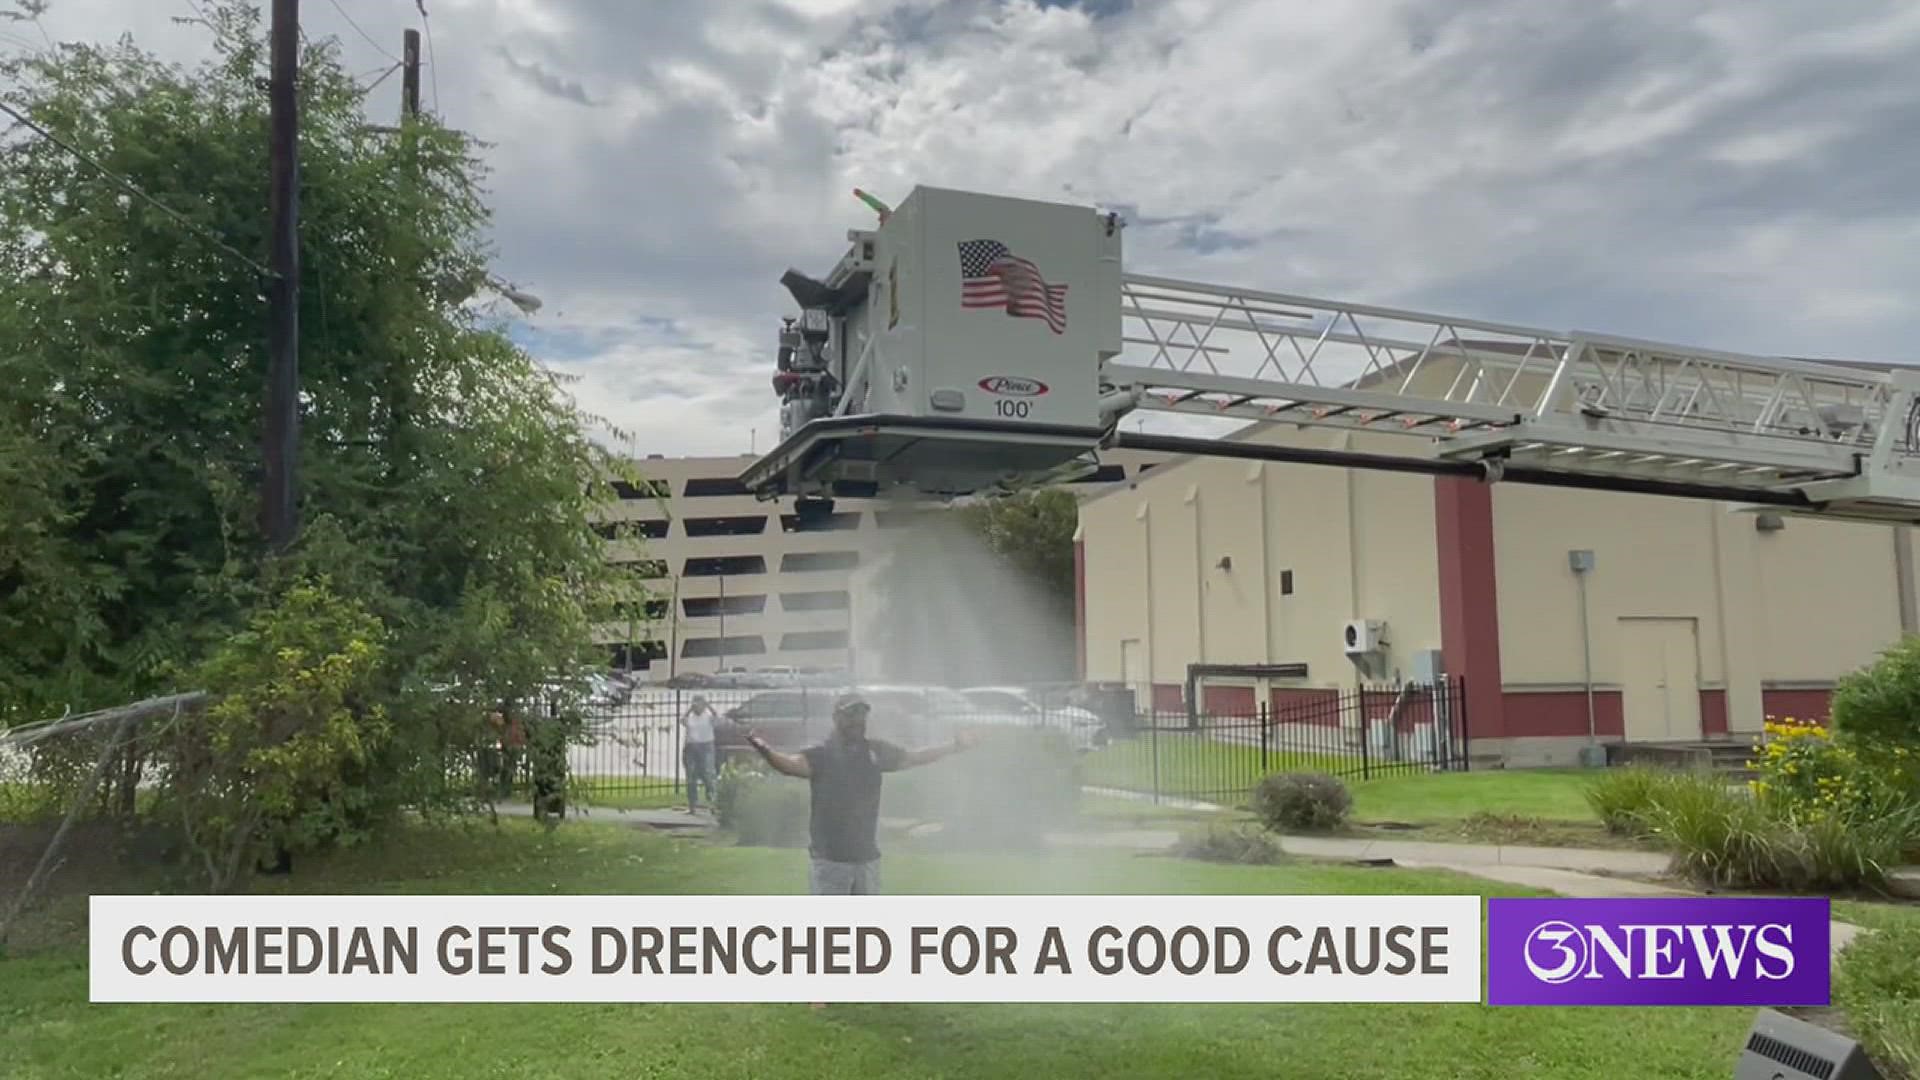 Steve Treviño promised last year that if his donation to the Ronald McDonald House was matched, he would come back to get sprayed by a firetruck.